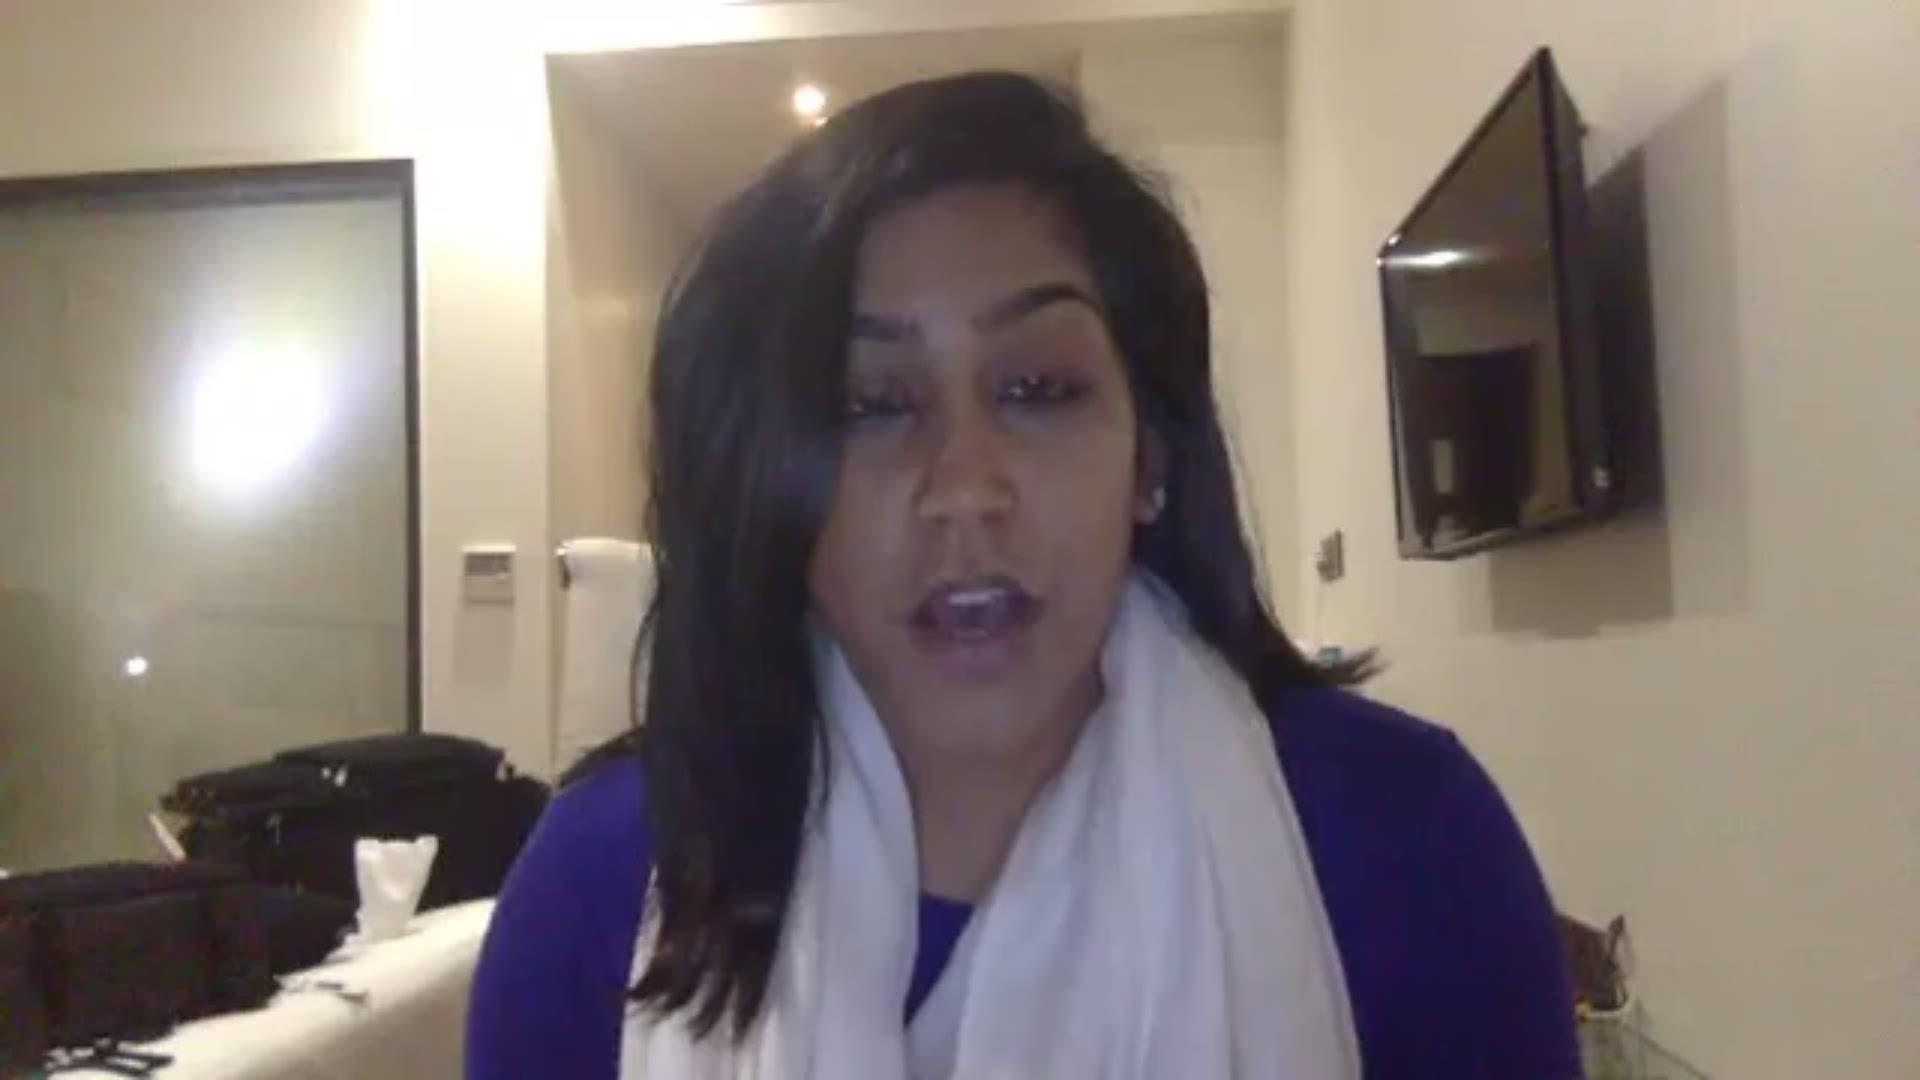 WFAA's Alisha Ebrahimji & Jobin Panicker in India sharing what they've learned about Sherin Mathews' life before she was adopted, brought to Dallas. http://on.wfaa.com/2gREfRY